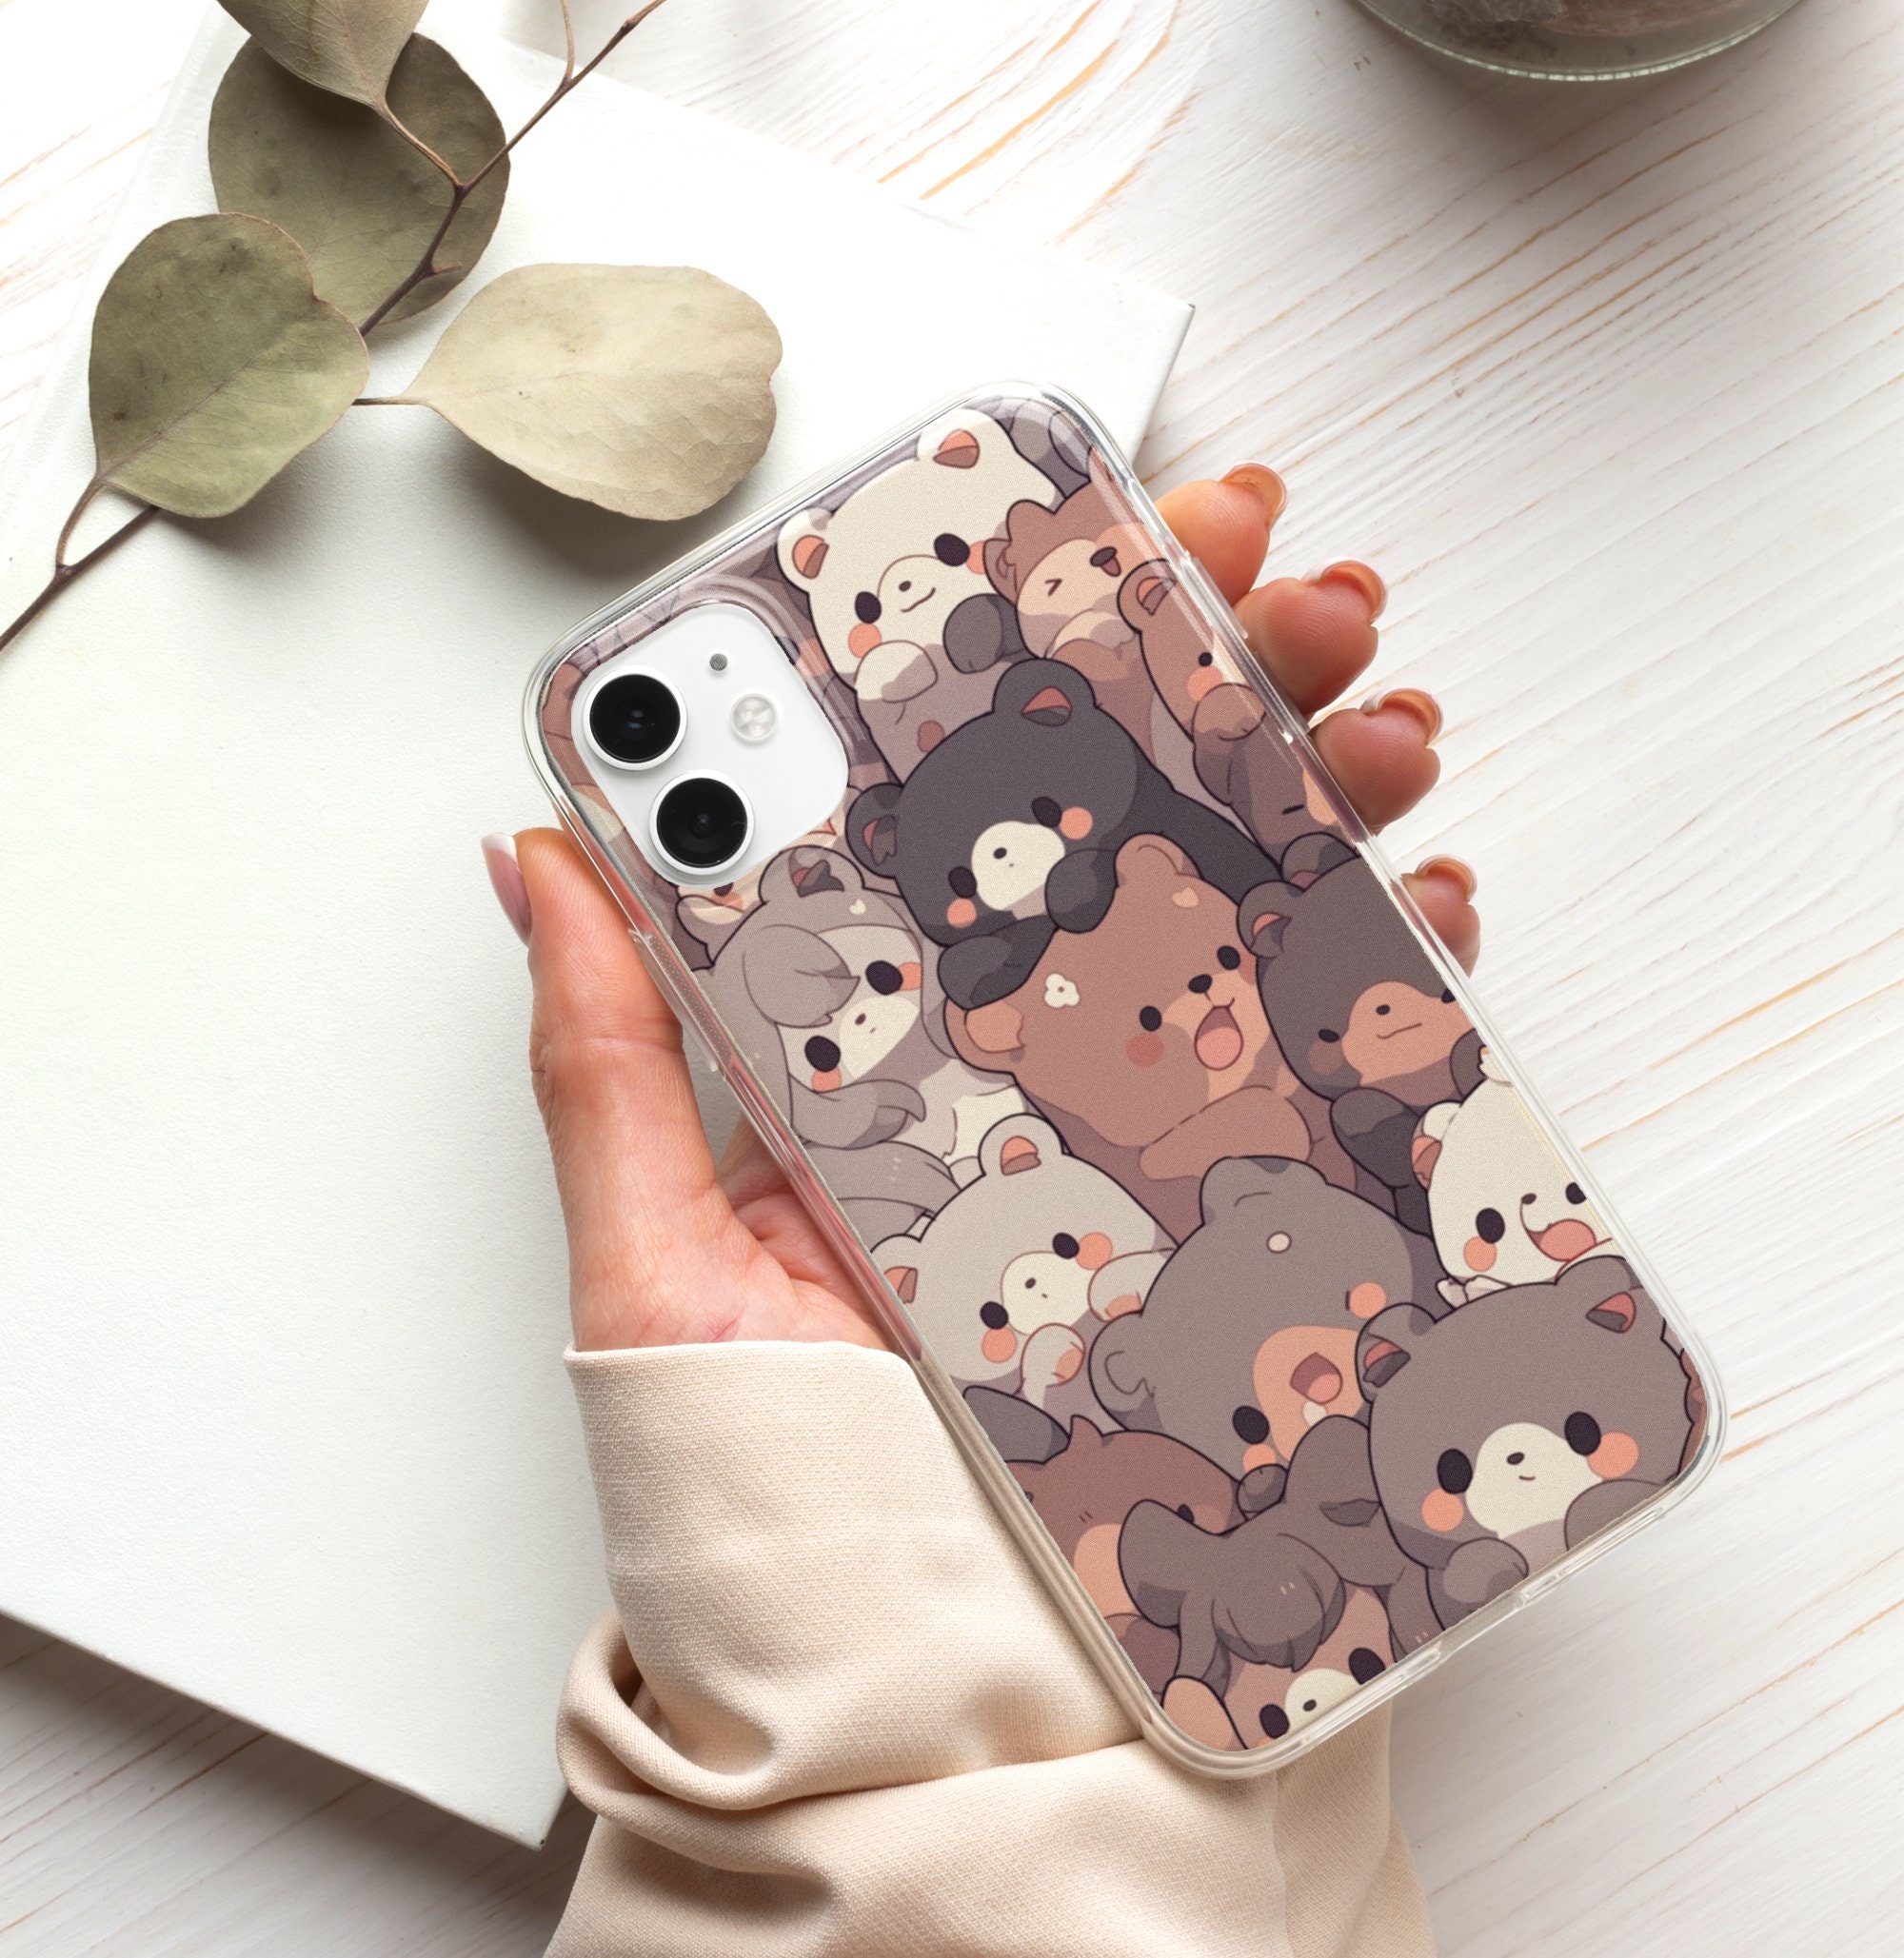 STARSTOKS Premium Stuffed Teddy Bear Printed Hard Mobile Back Cover for  Apple iphone 13, Beautiful Designer Case & Cover For Your Smartphone